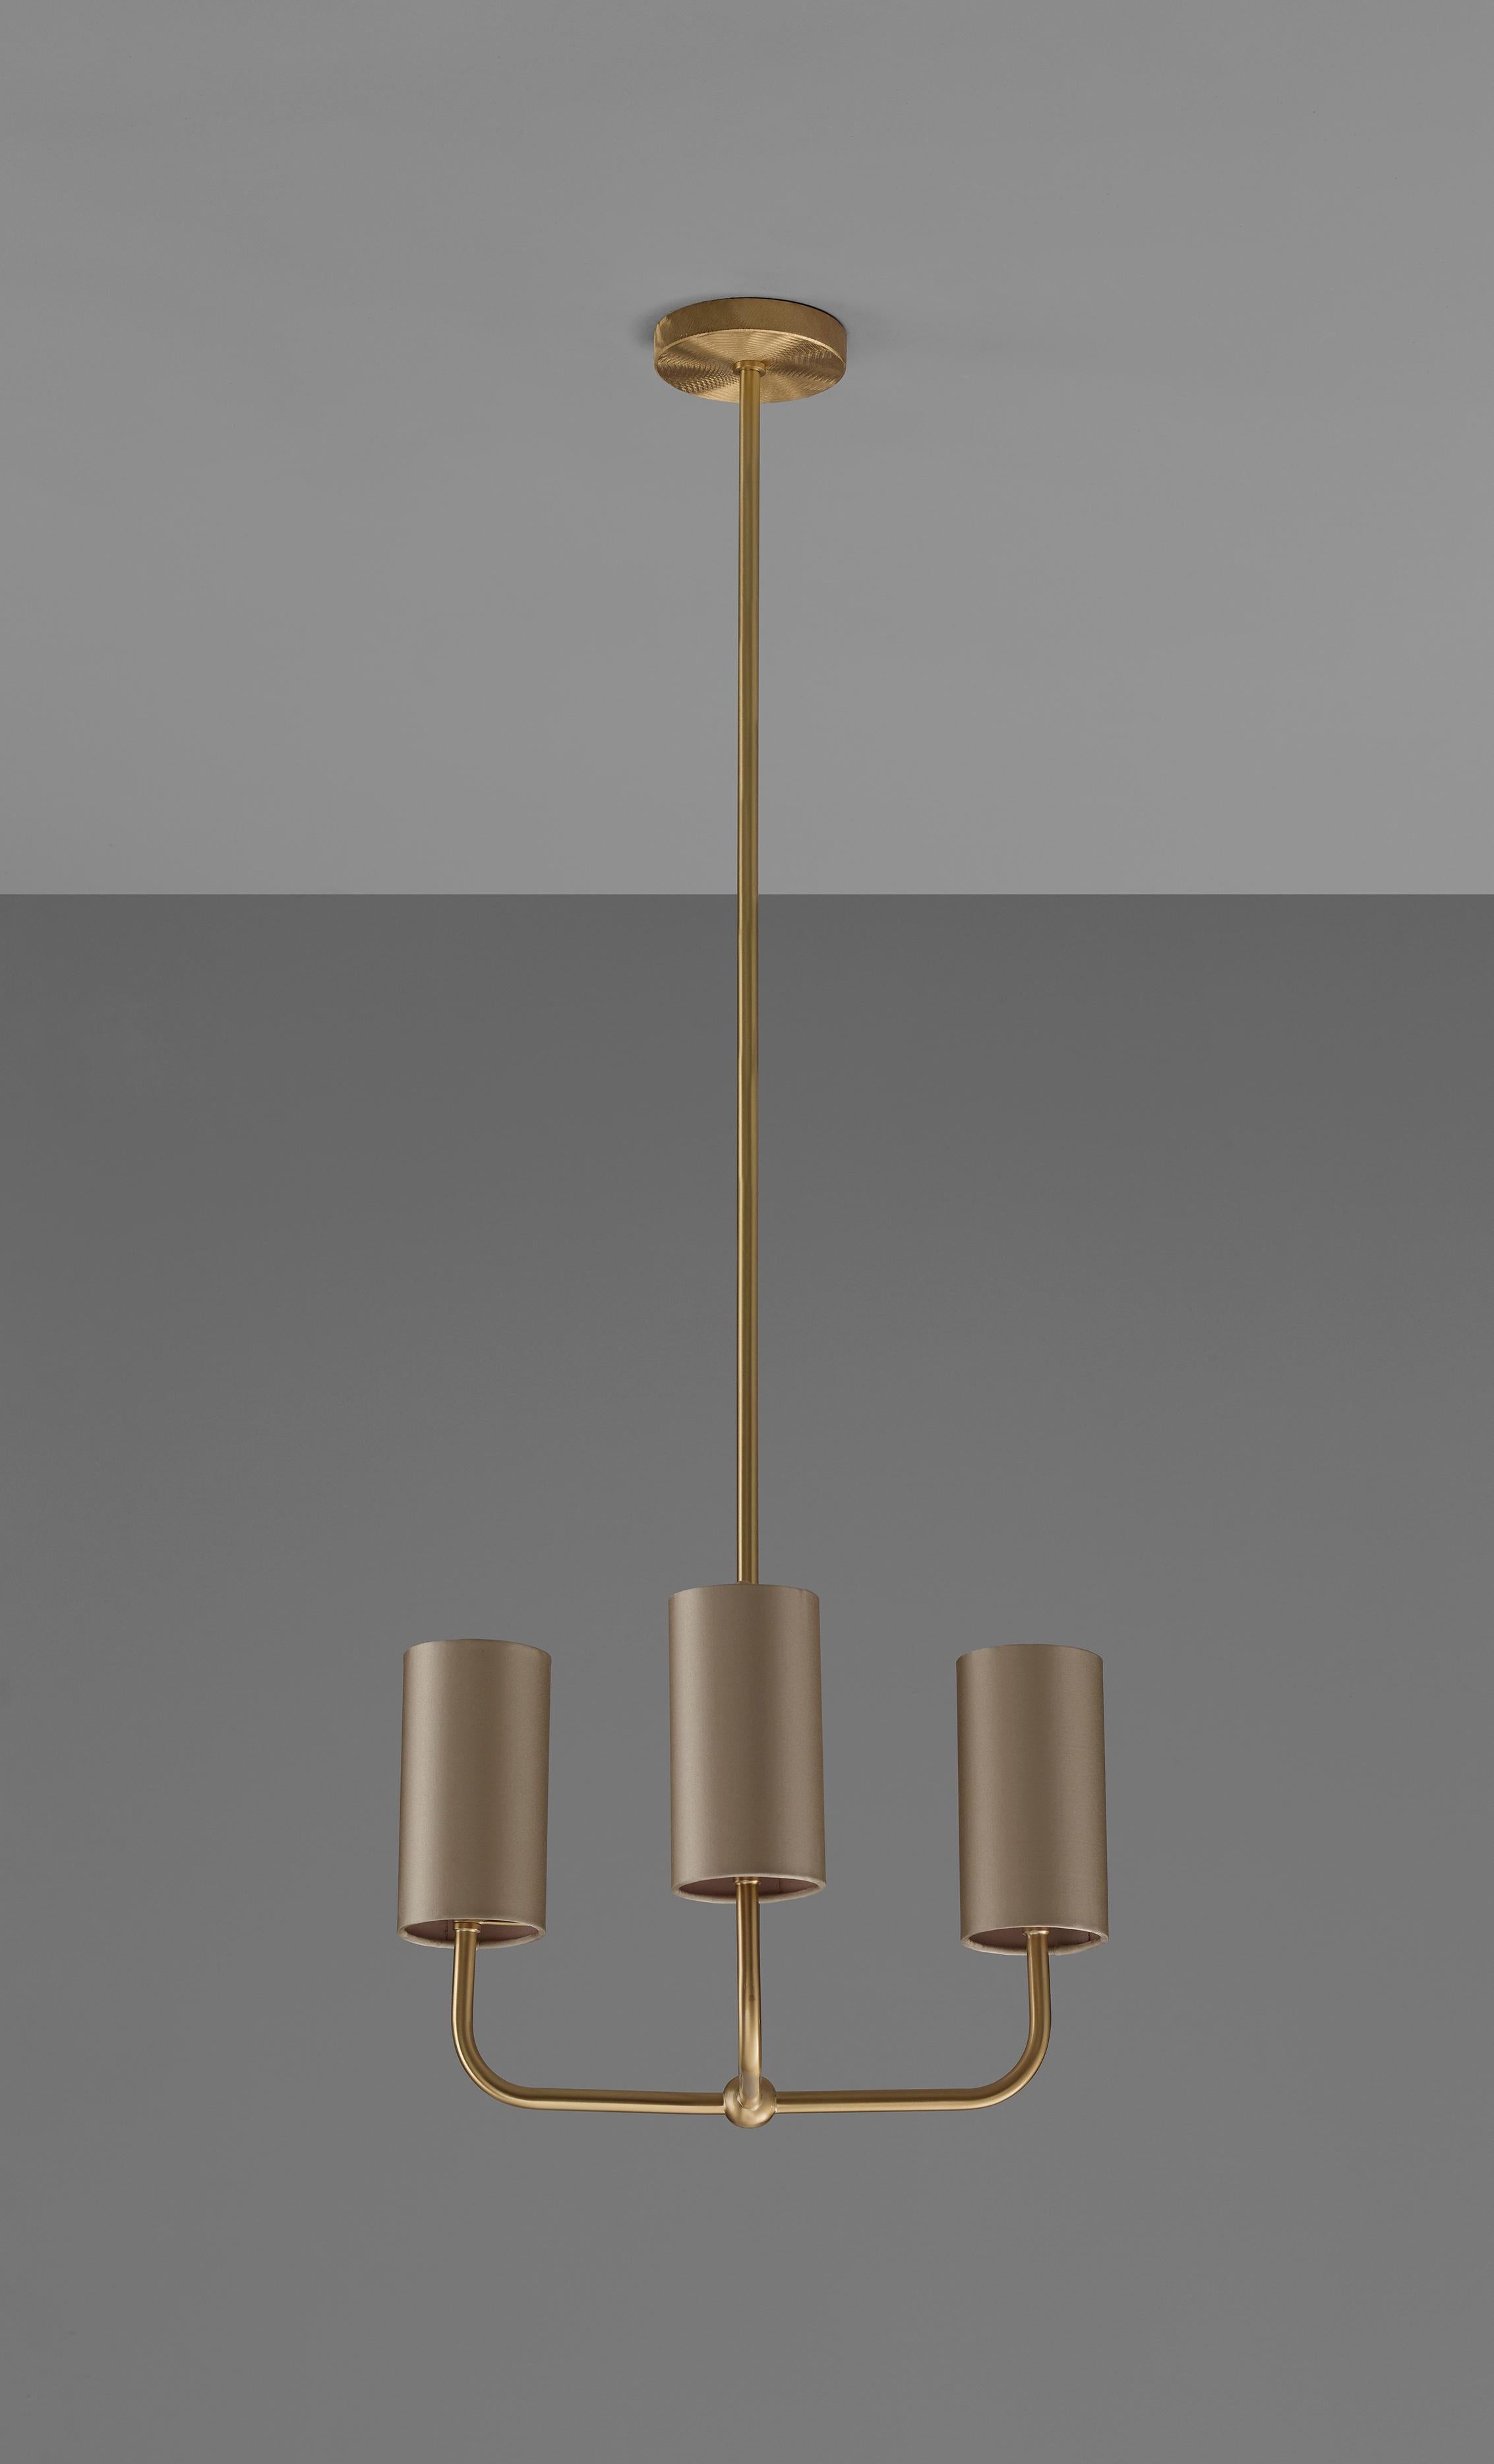 European Imagin Classic Pendant Light 2 in Brushed Brass and Fabric Shade For Sale